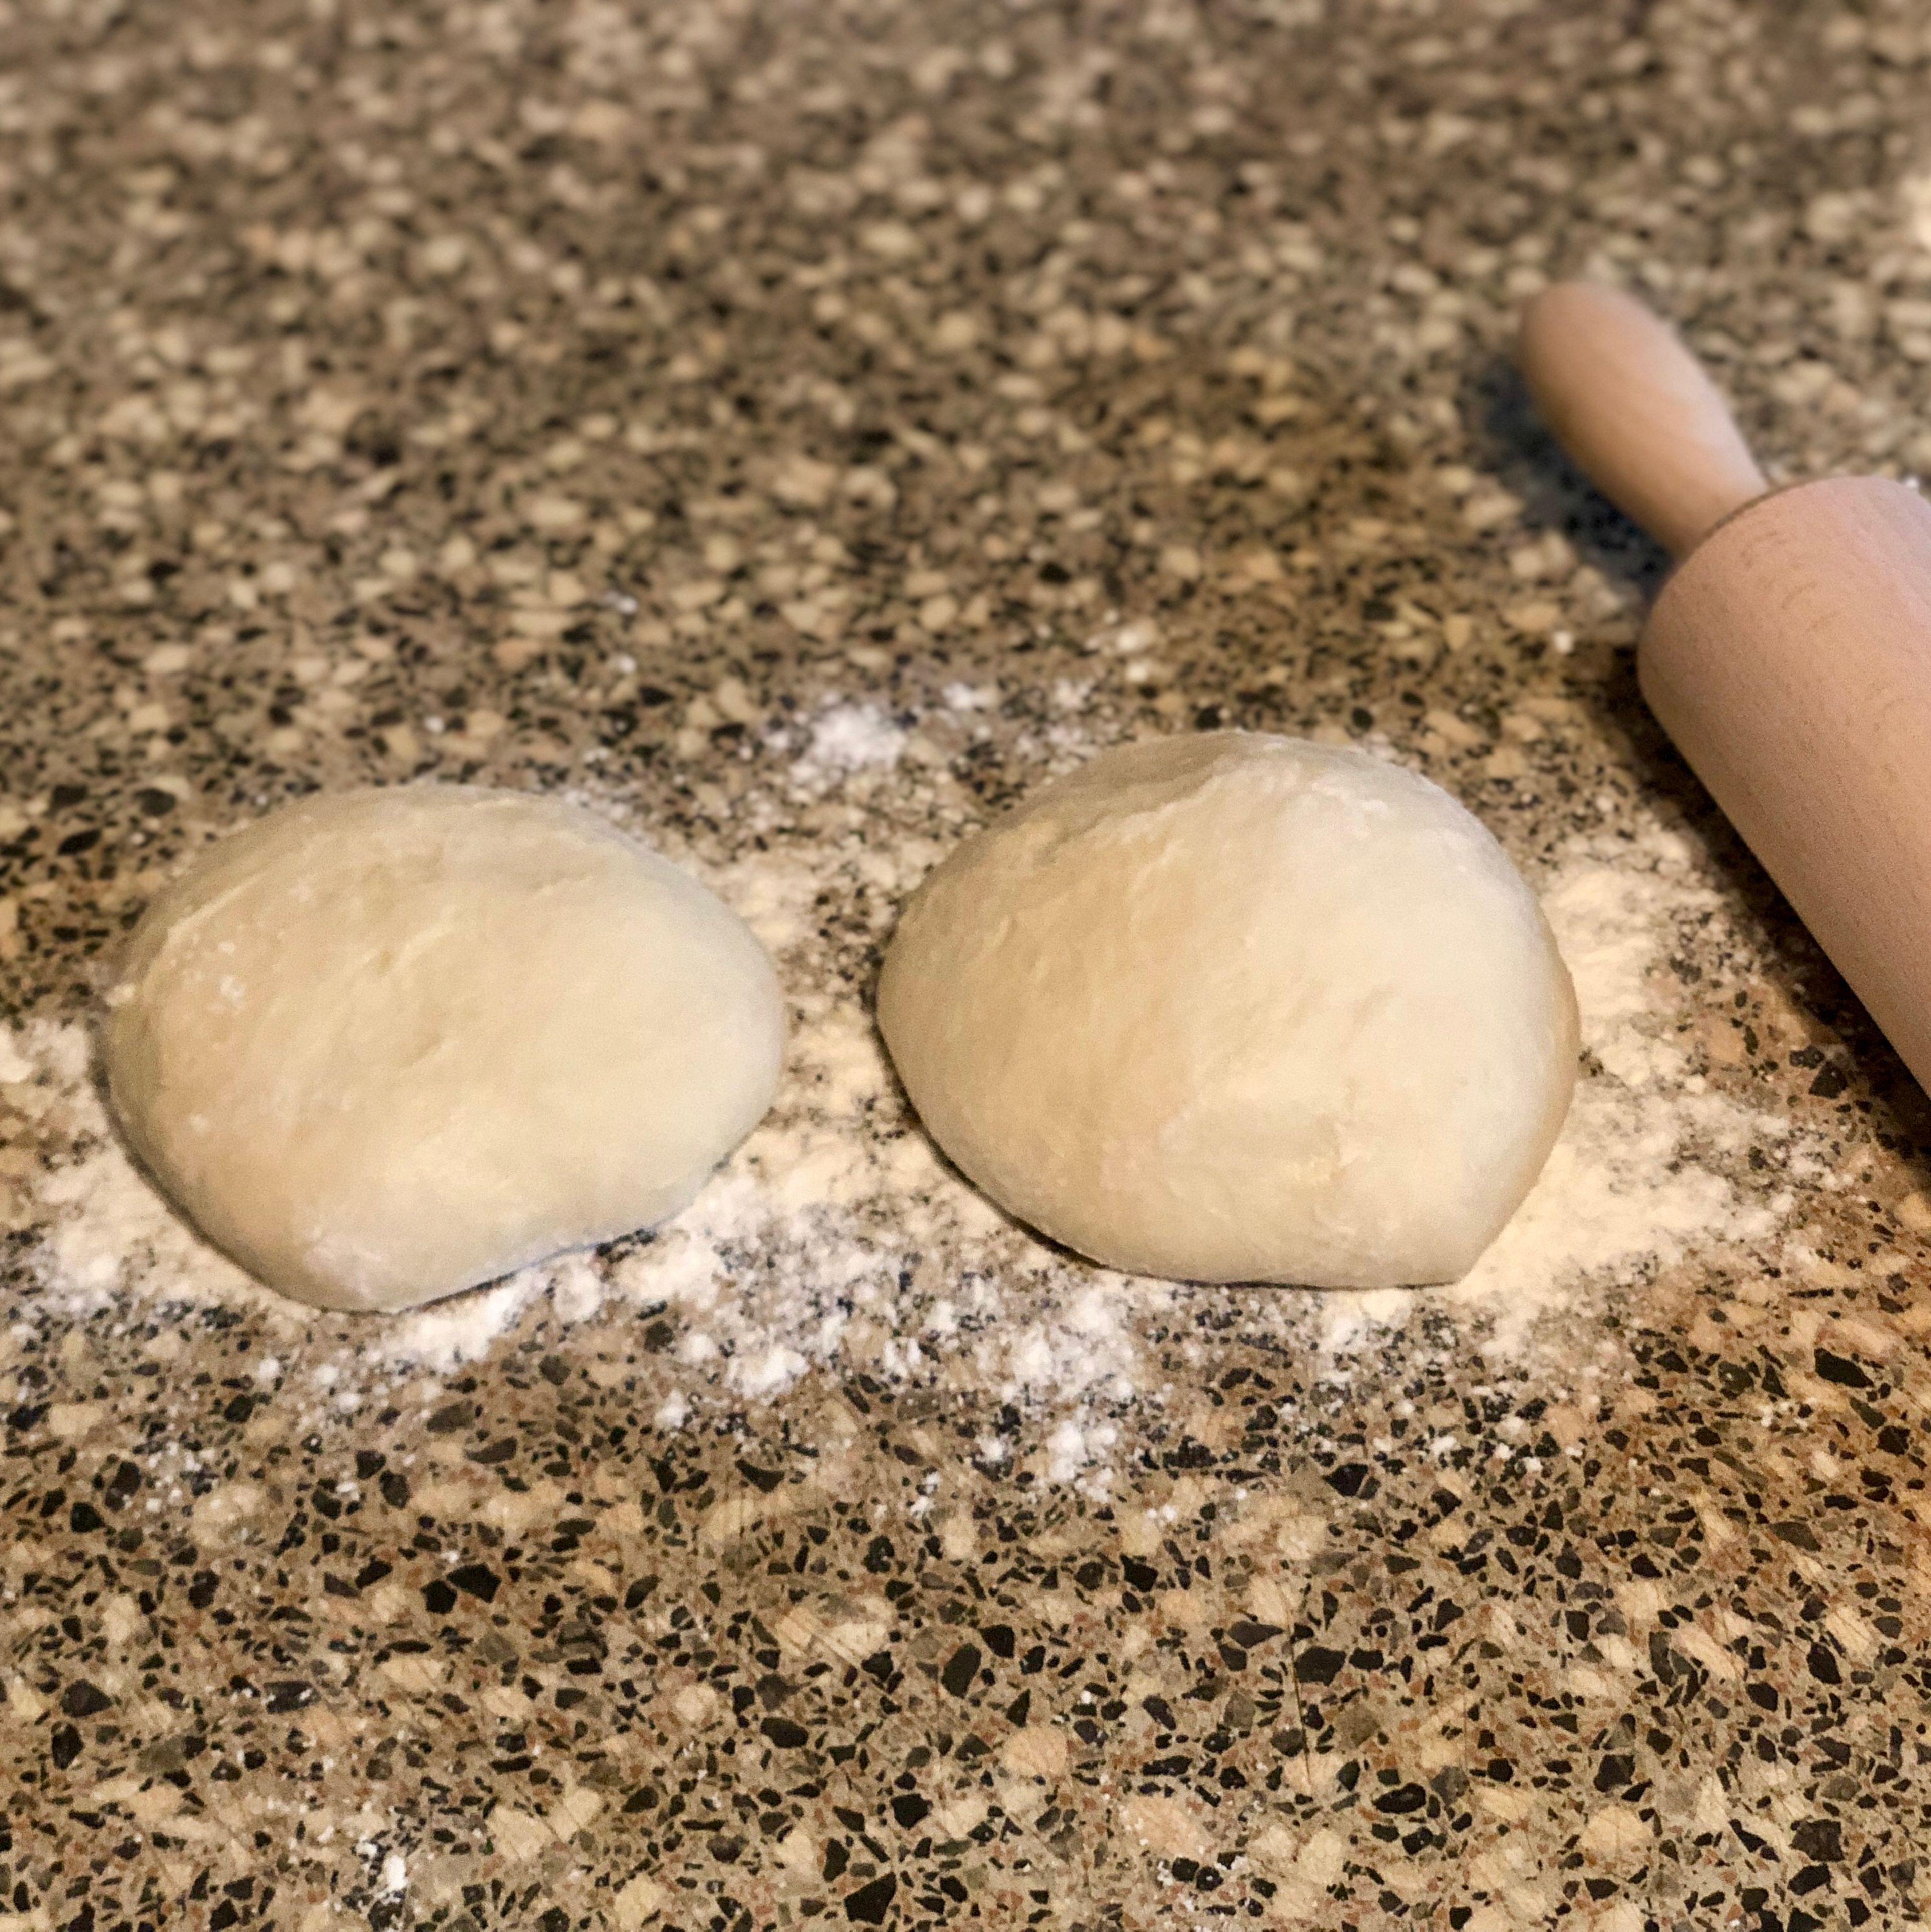 Cut the dough into two portions and shape into balls.